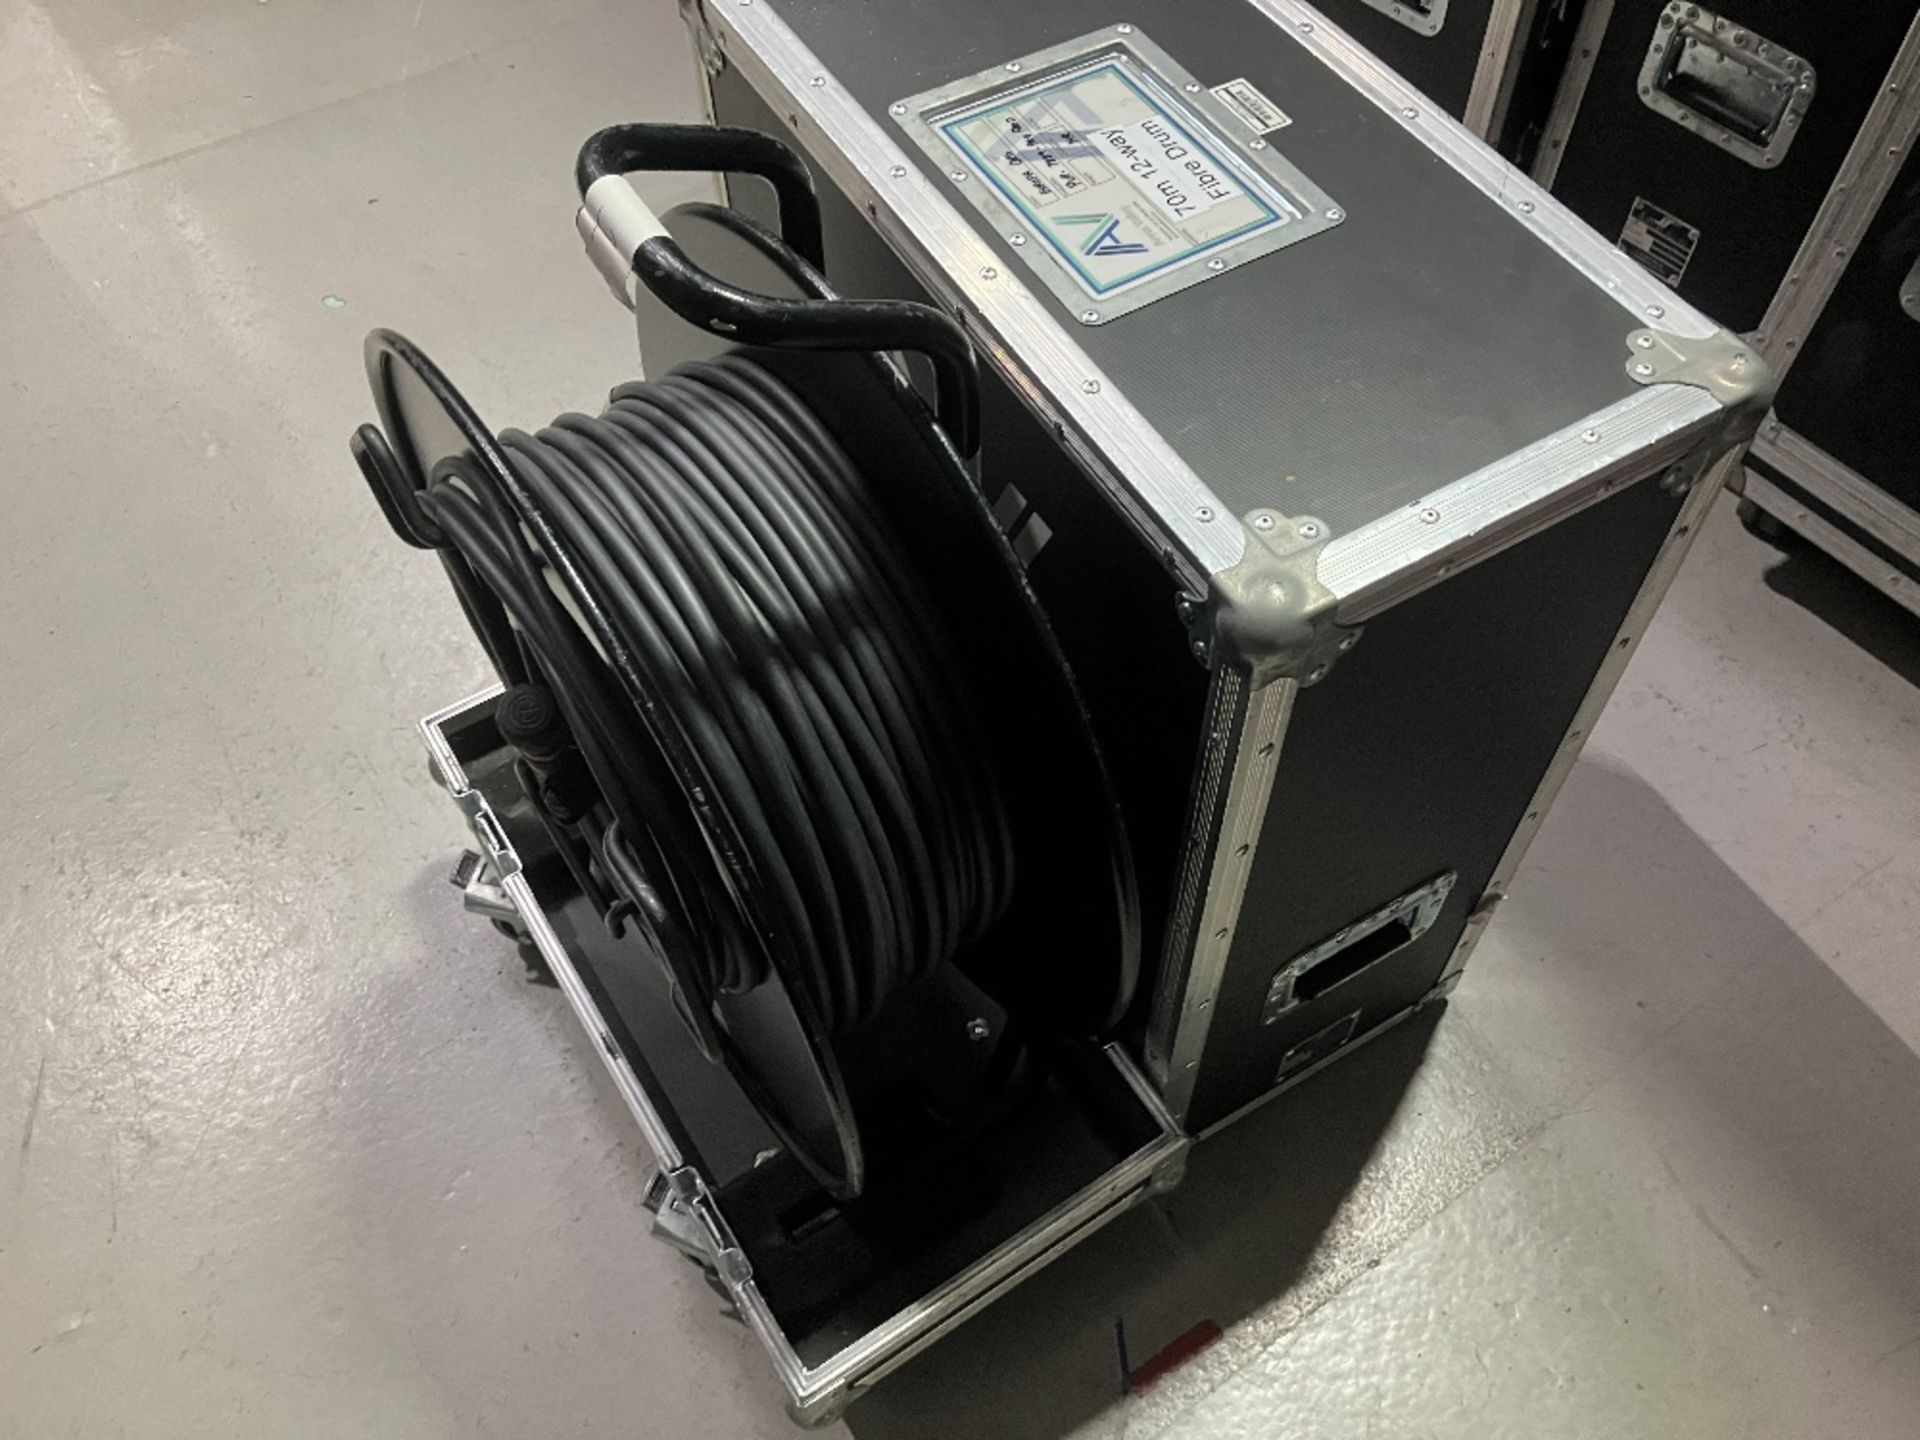 70m 12-way Fibre Cable Reel With Heavy Duty Mobile Flight Case - Image 7 of 7